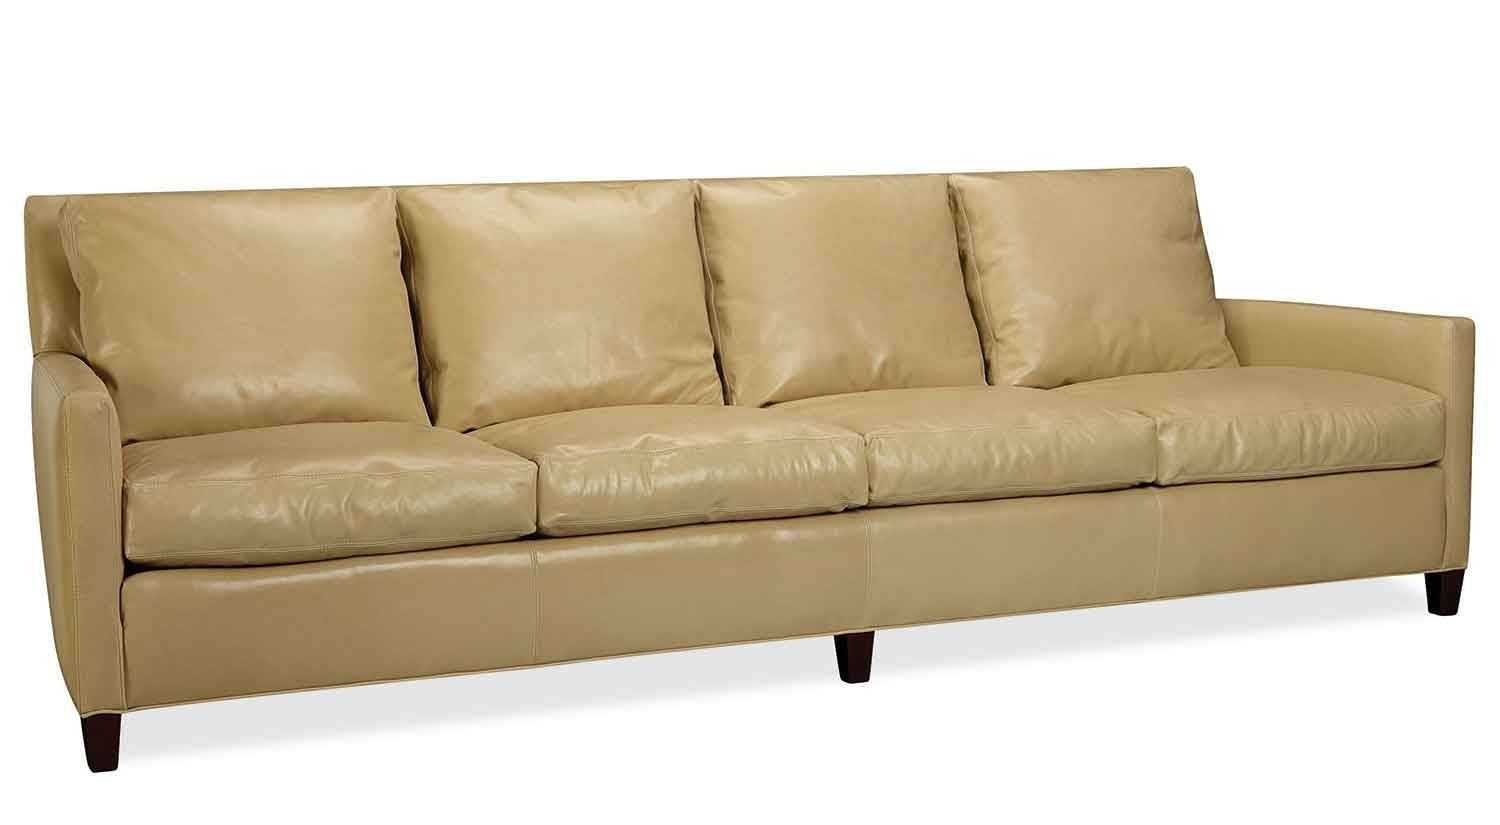 4 Seat Couch | Woodworking Plans Regarding 4 Seater Sofas (View 2 of 30)